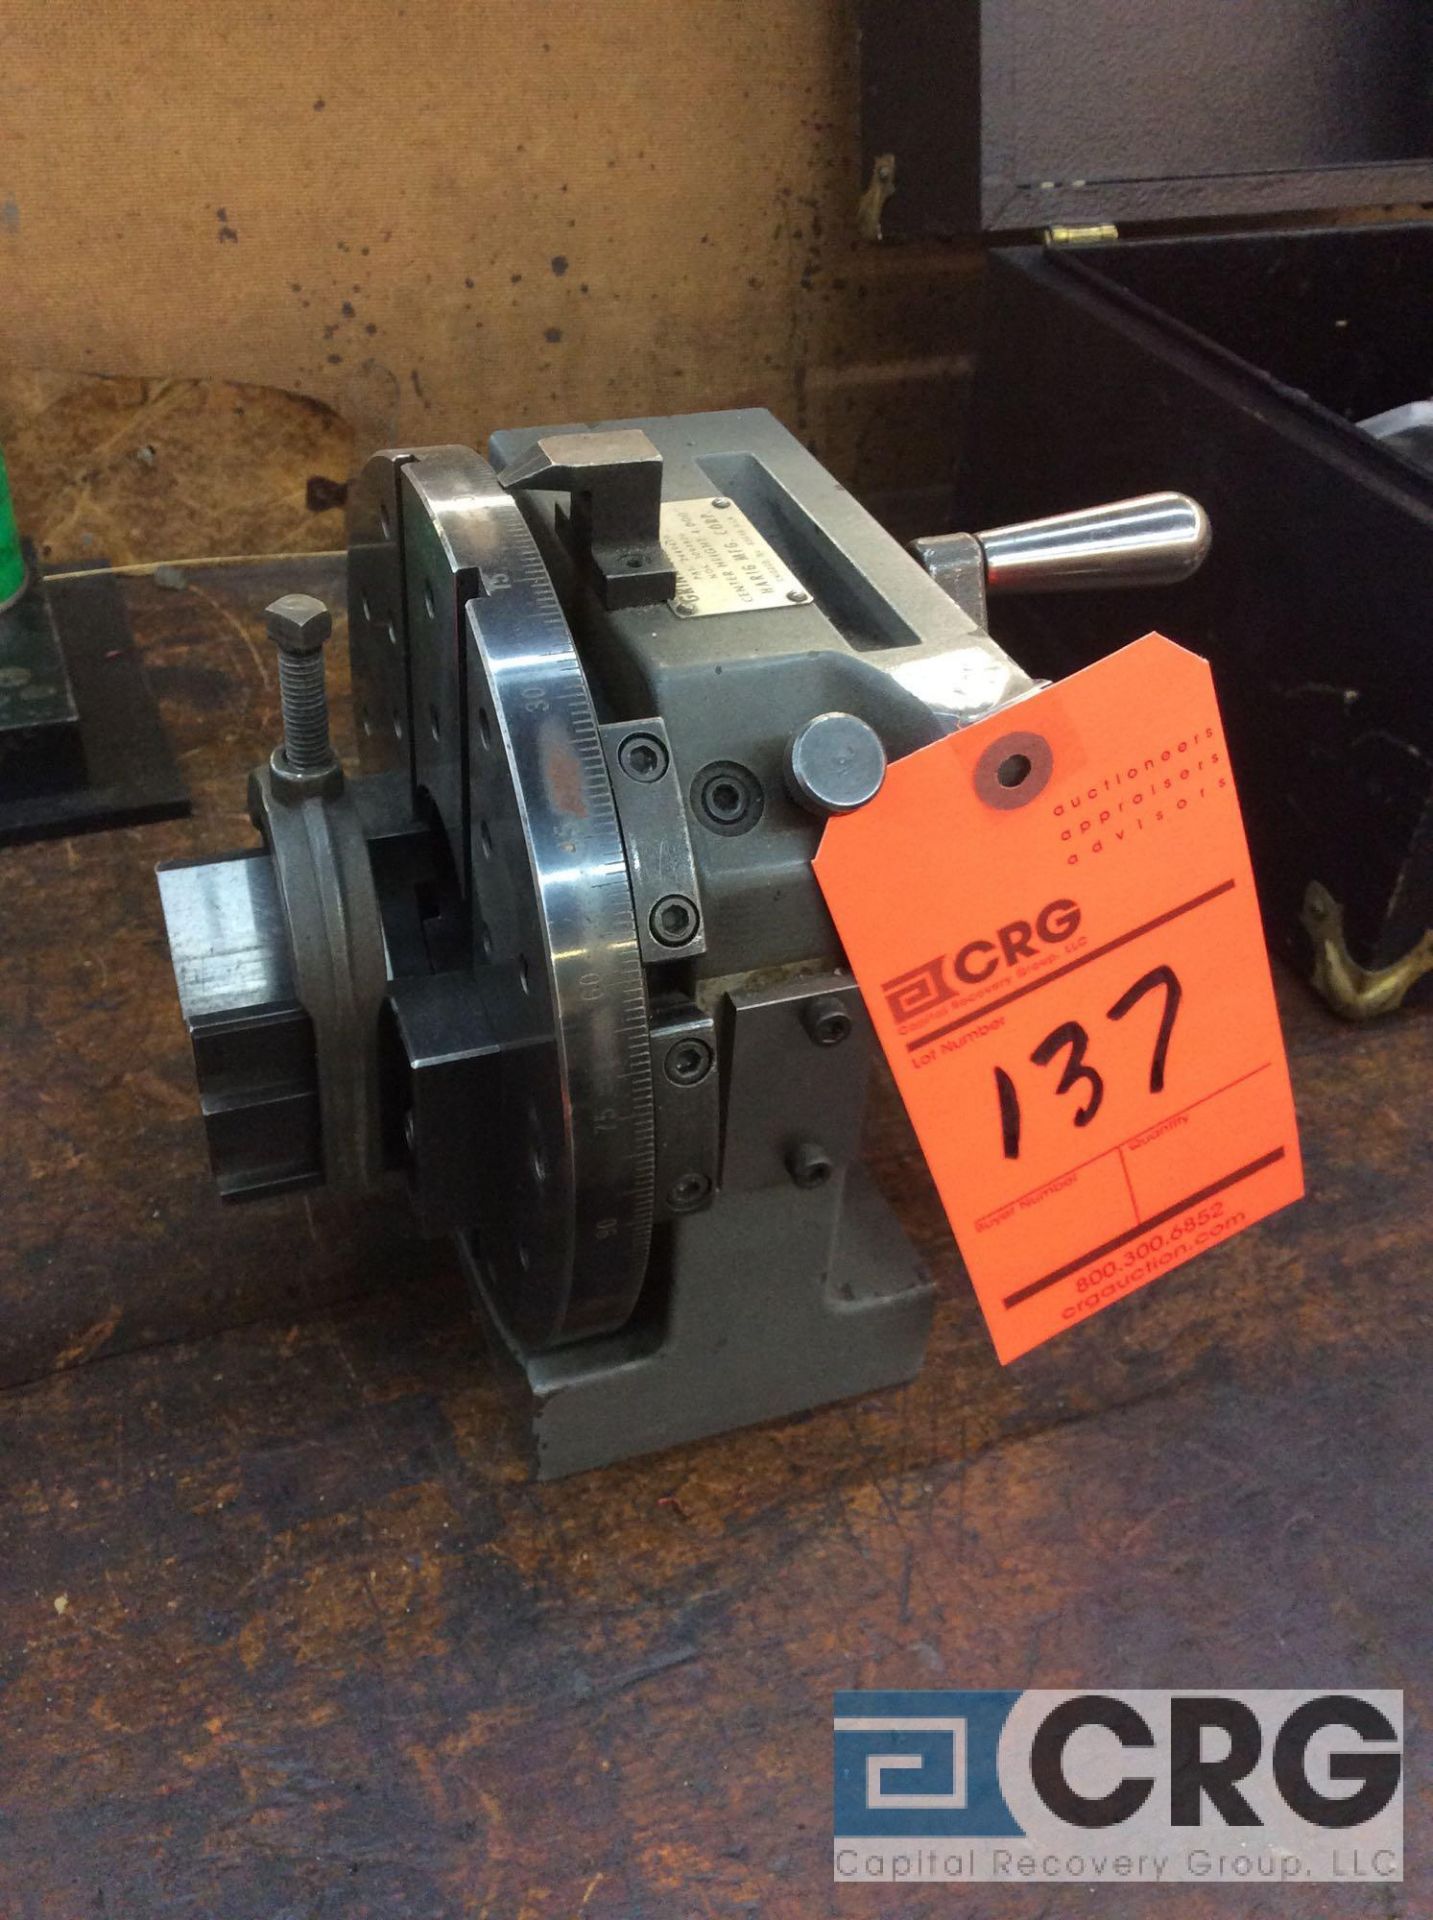 Harig Grind All #2 V-Block grinding fixture and Indexing spacer (LOCATED IN TOOL ROOM MACHINE SHOP)